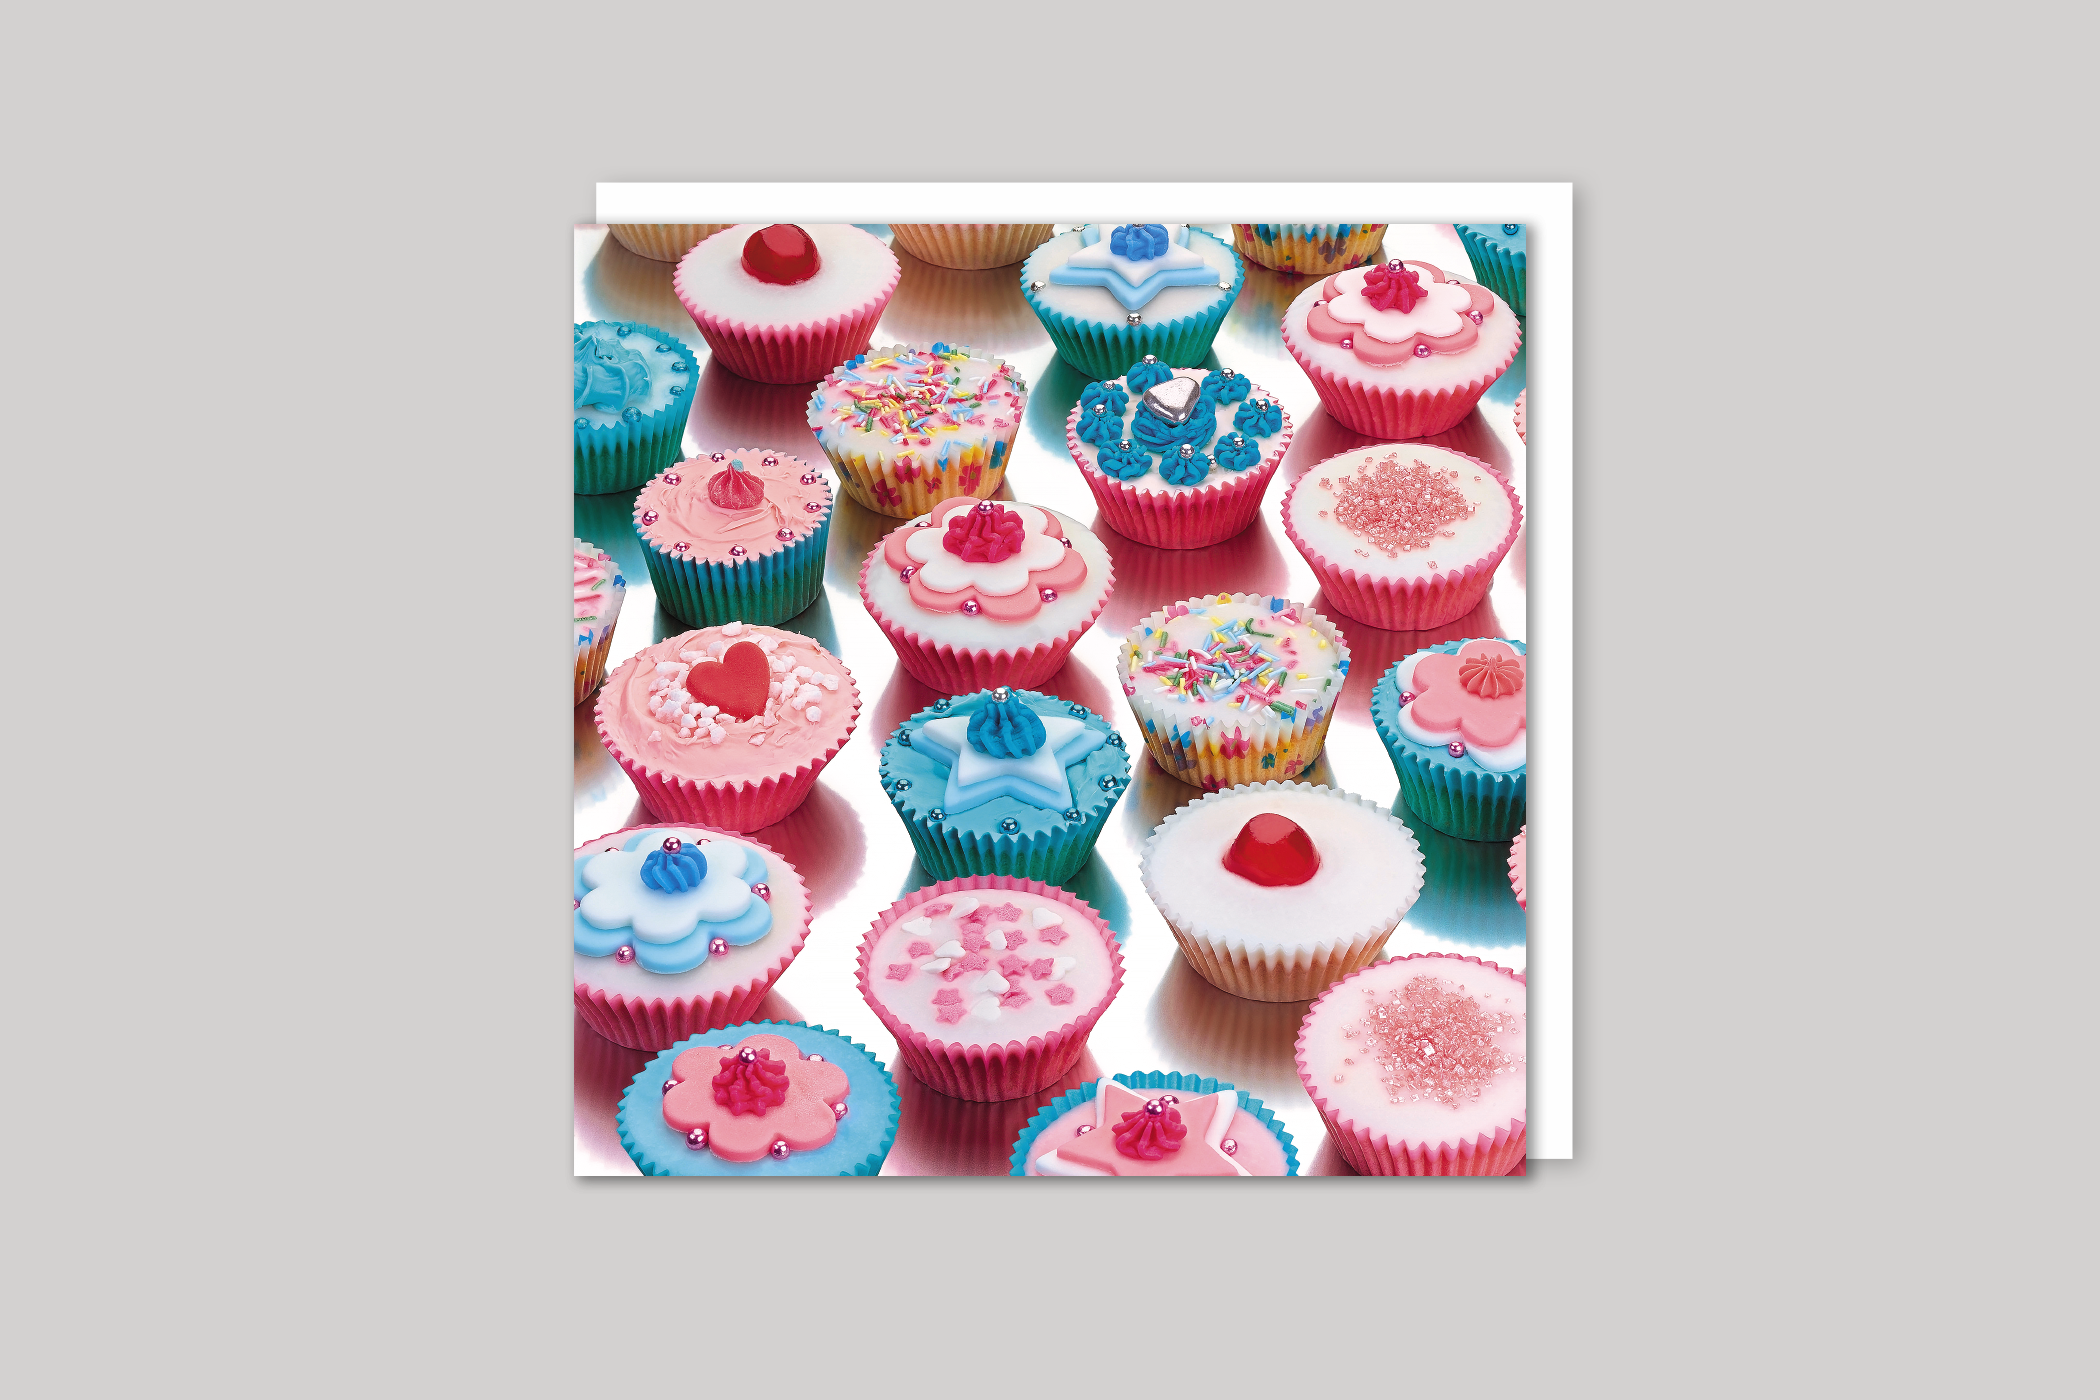 Fancy Cupcakes from Exposure range of photographic cards by Icon, back page.